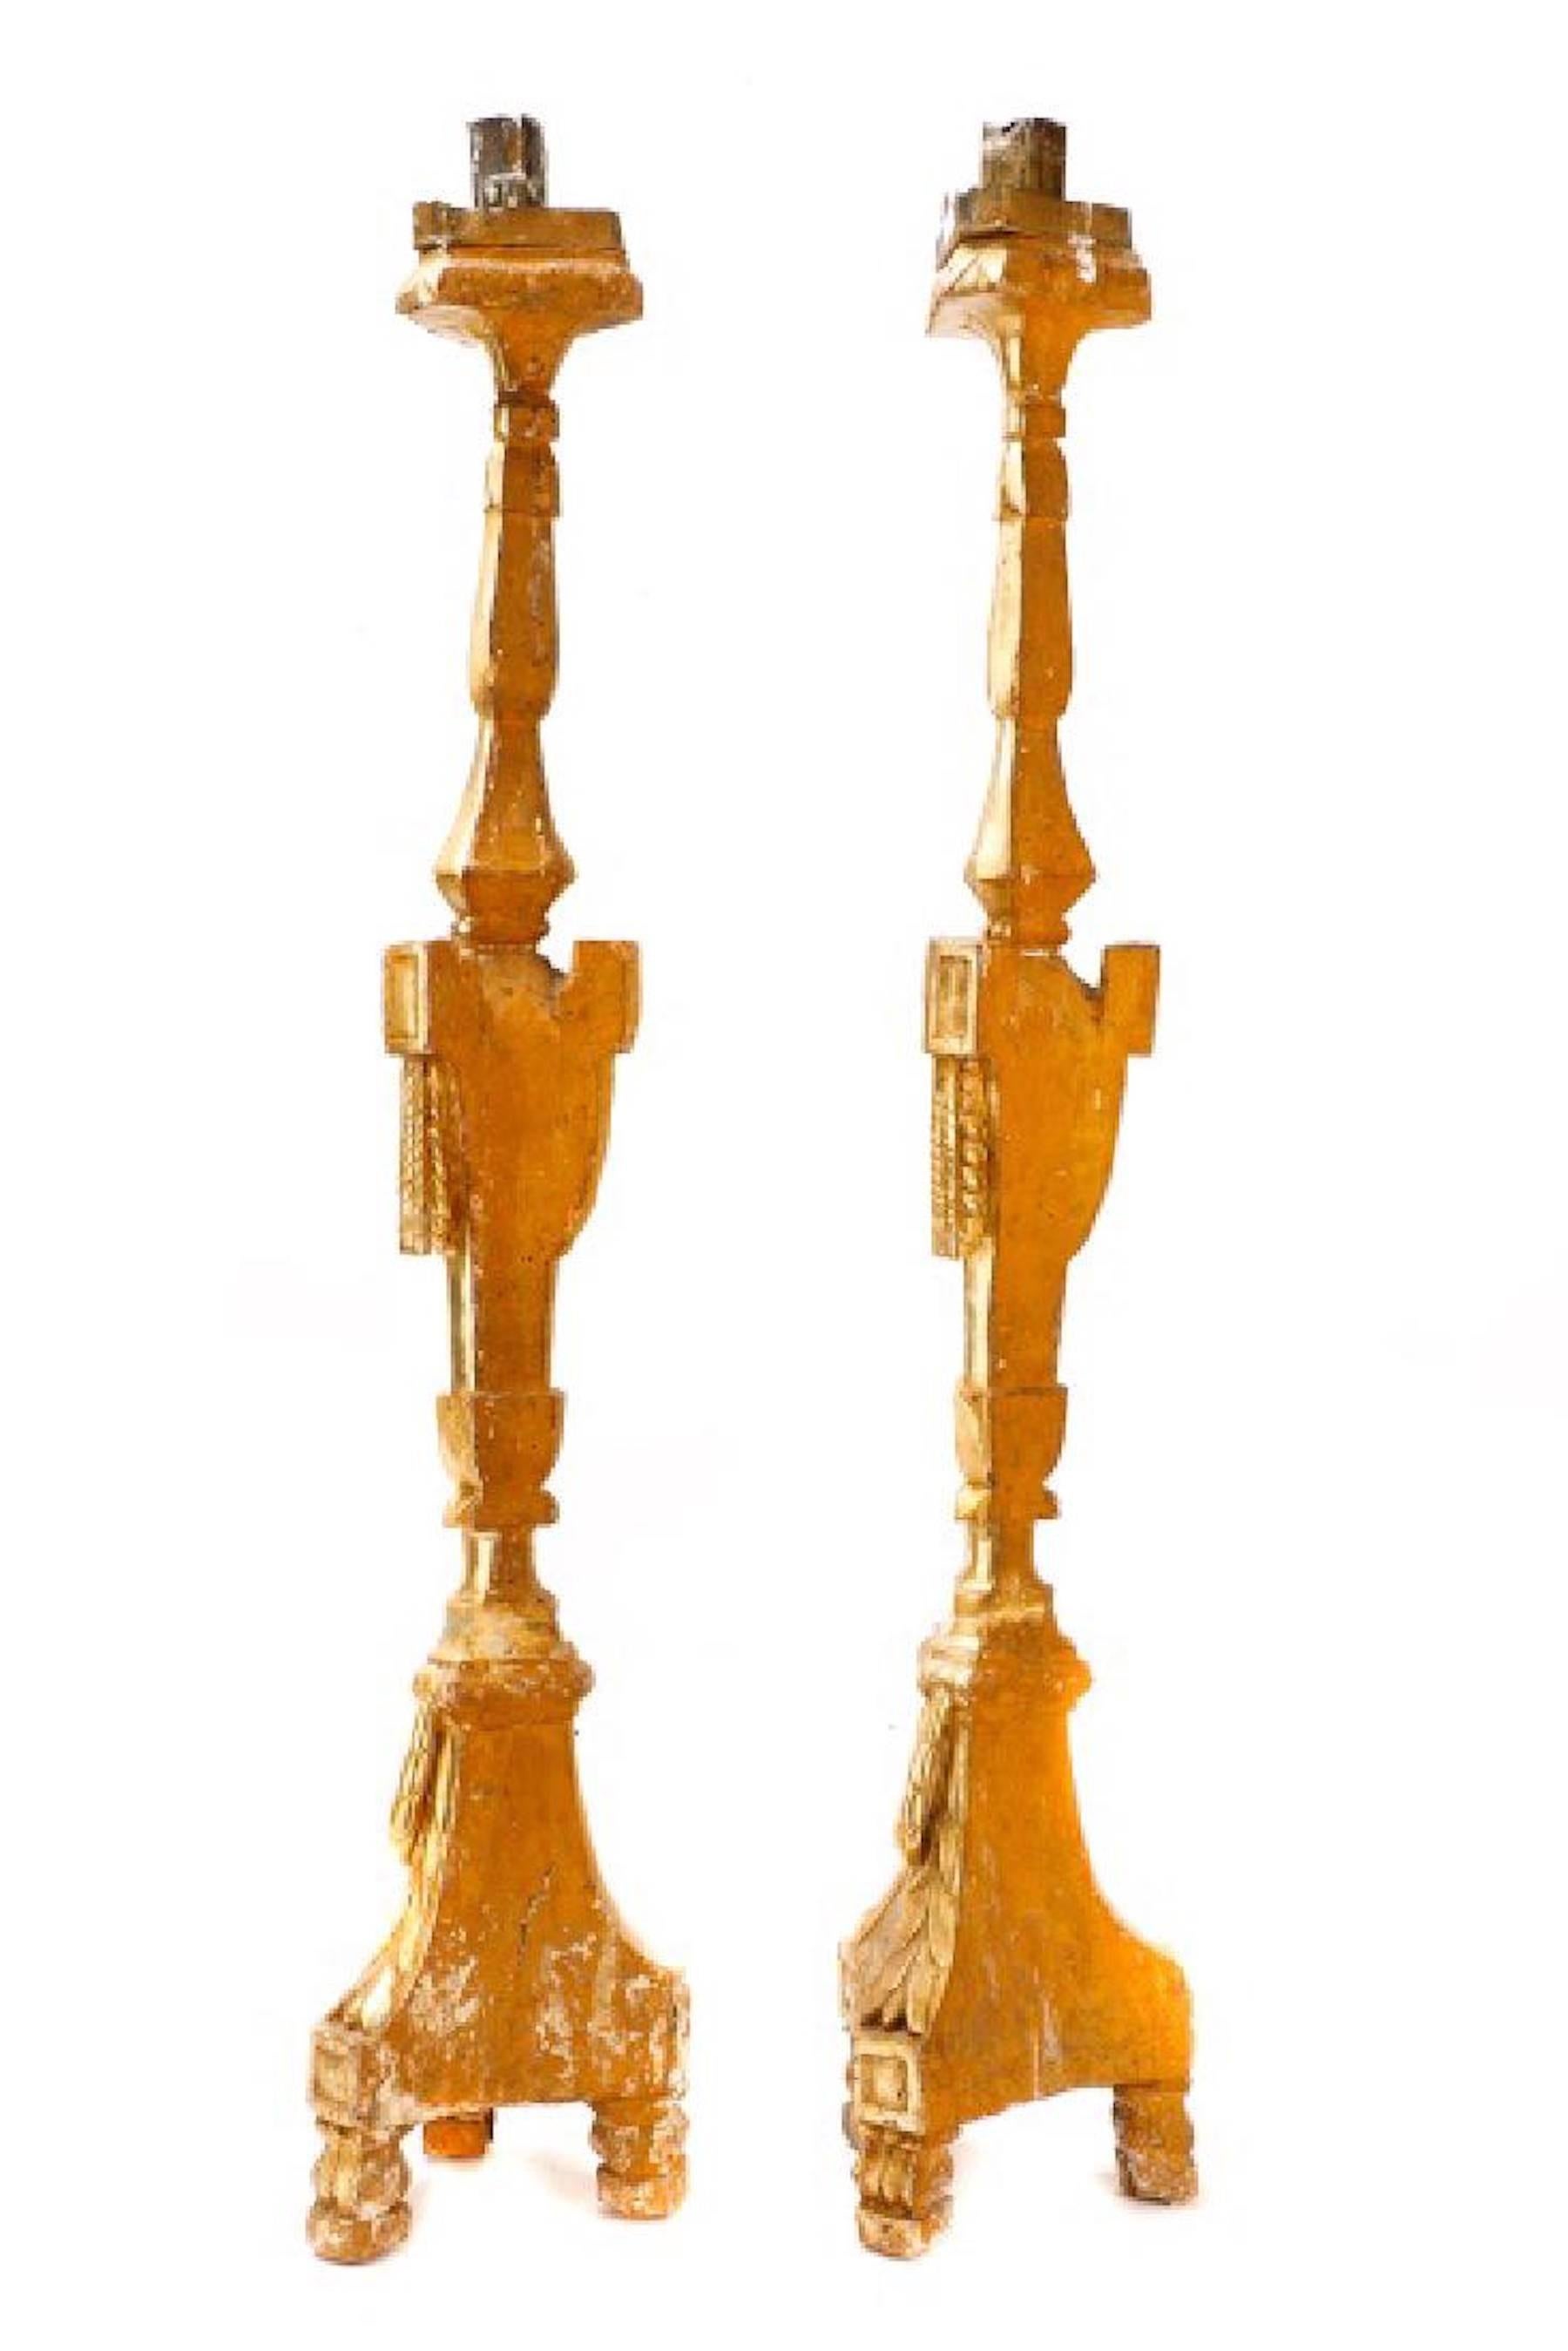 Pair of antique Italian silver gilt pricket candlesticks, large-scale, beautiful patina.

 